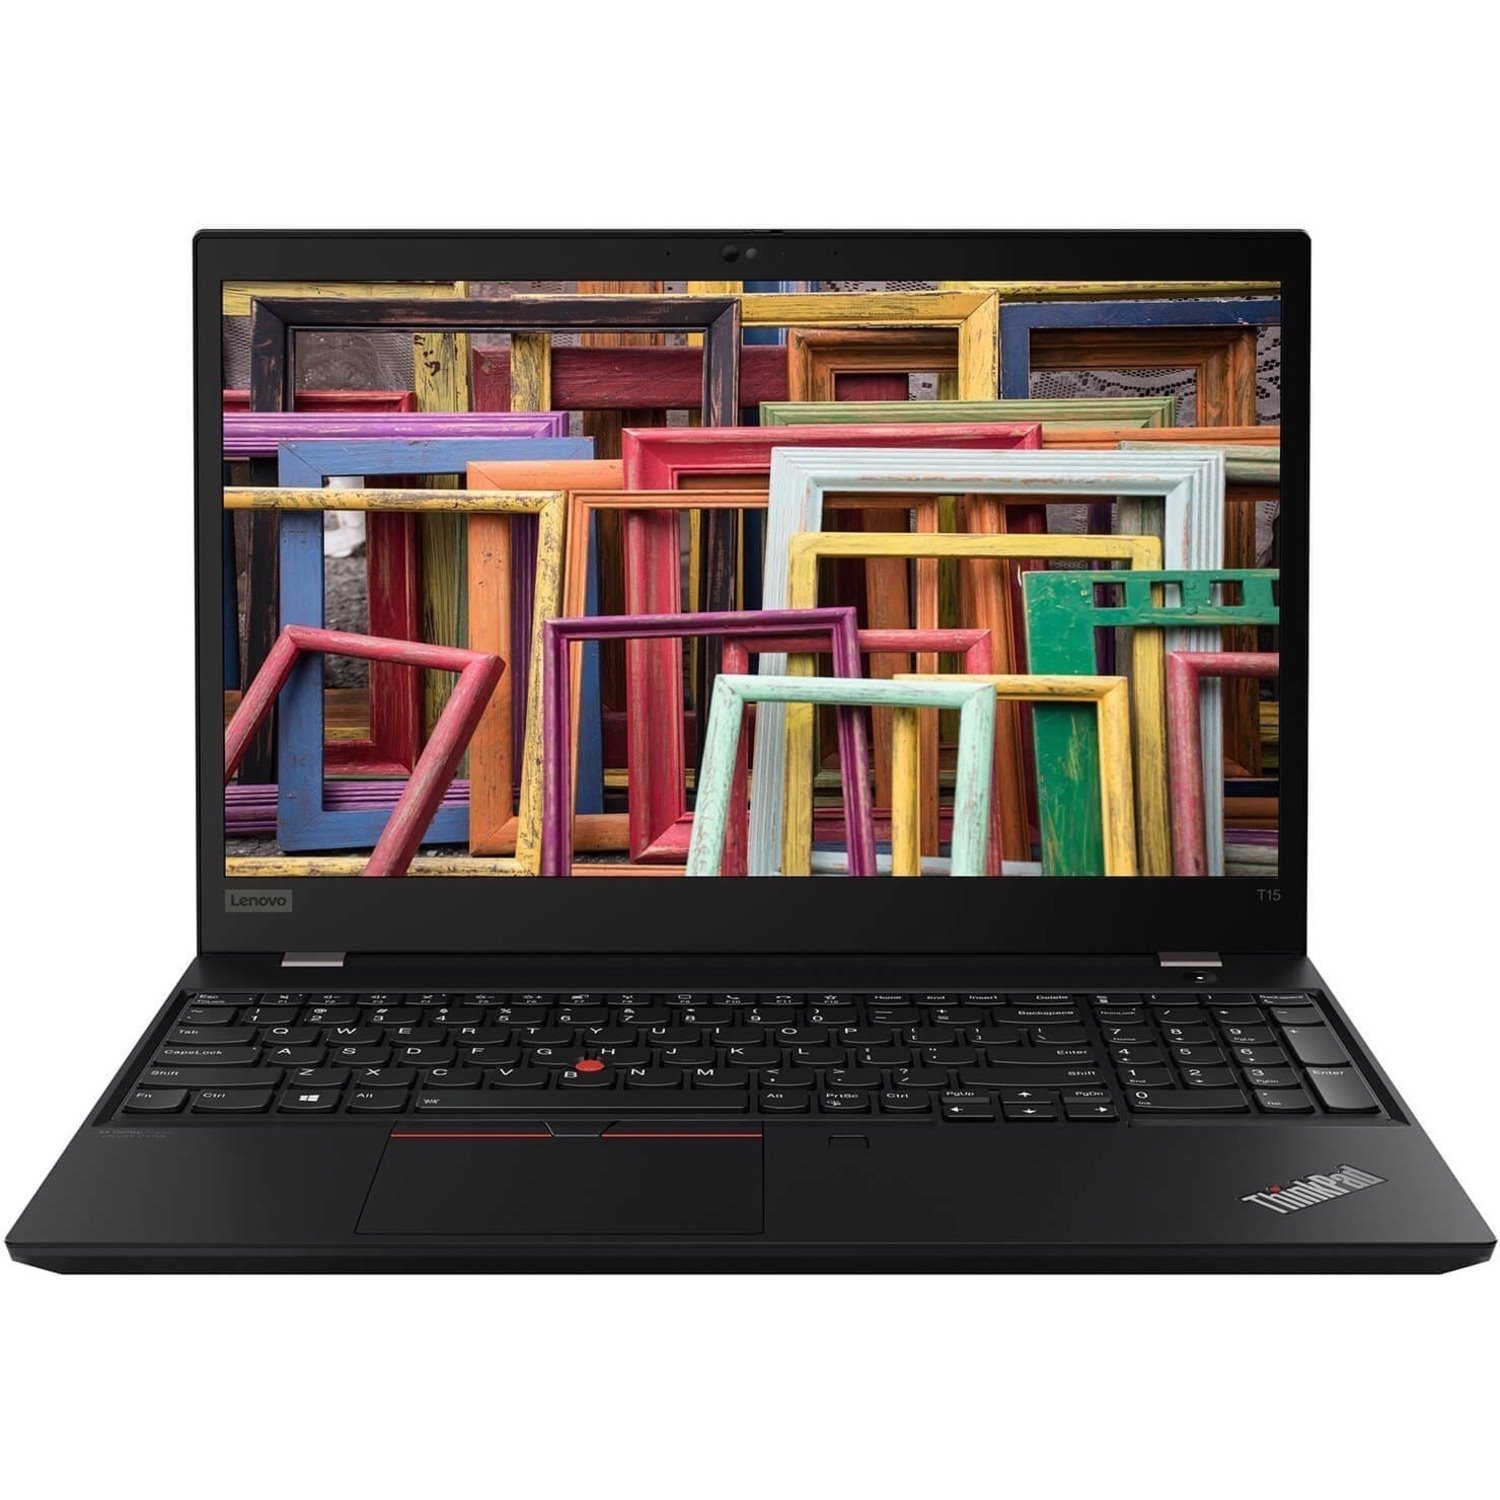 Lenovo ThinkPad T15 Gen 2 20W400K1US 15.6" Touchscreen Notebook - Full HD - 1920 x 1080 - Intel Core i7 11th Gen i7-1185G7 Quad-core (4 Core) 3GHz - 16GB Total RAM - 512GB SSD - Black - no ethernet port - not compatible with mechanical docking stations